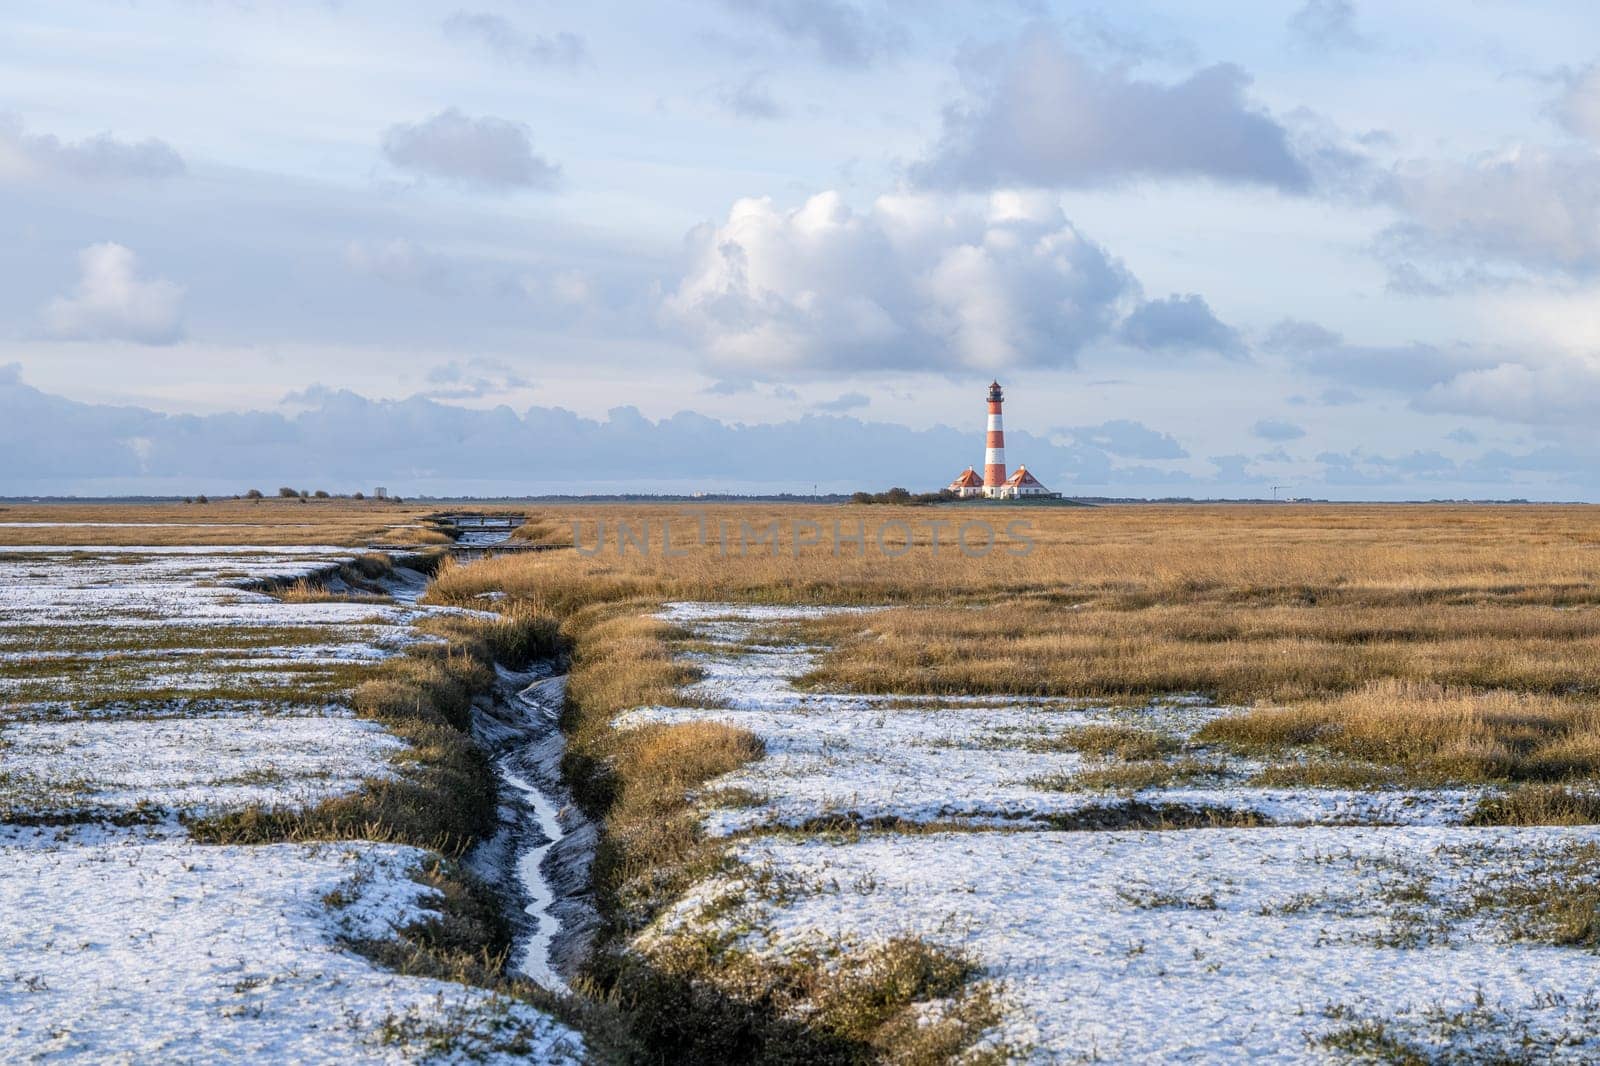 Lighthouse of Westerhever, North Frisia, Germany by alfotokunst